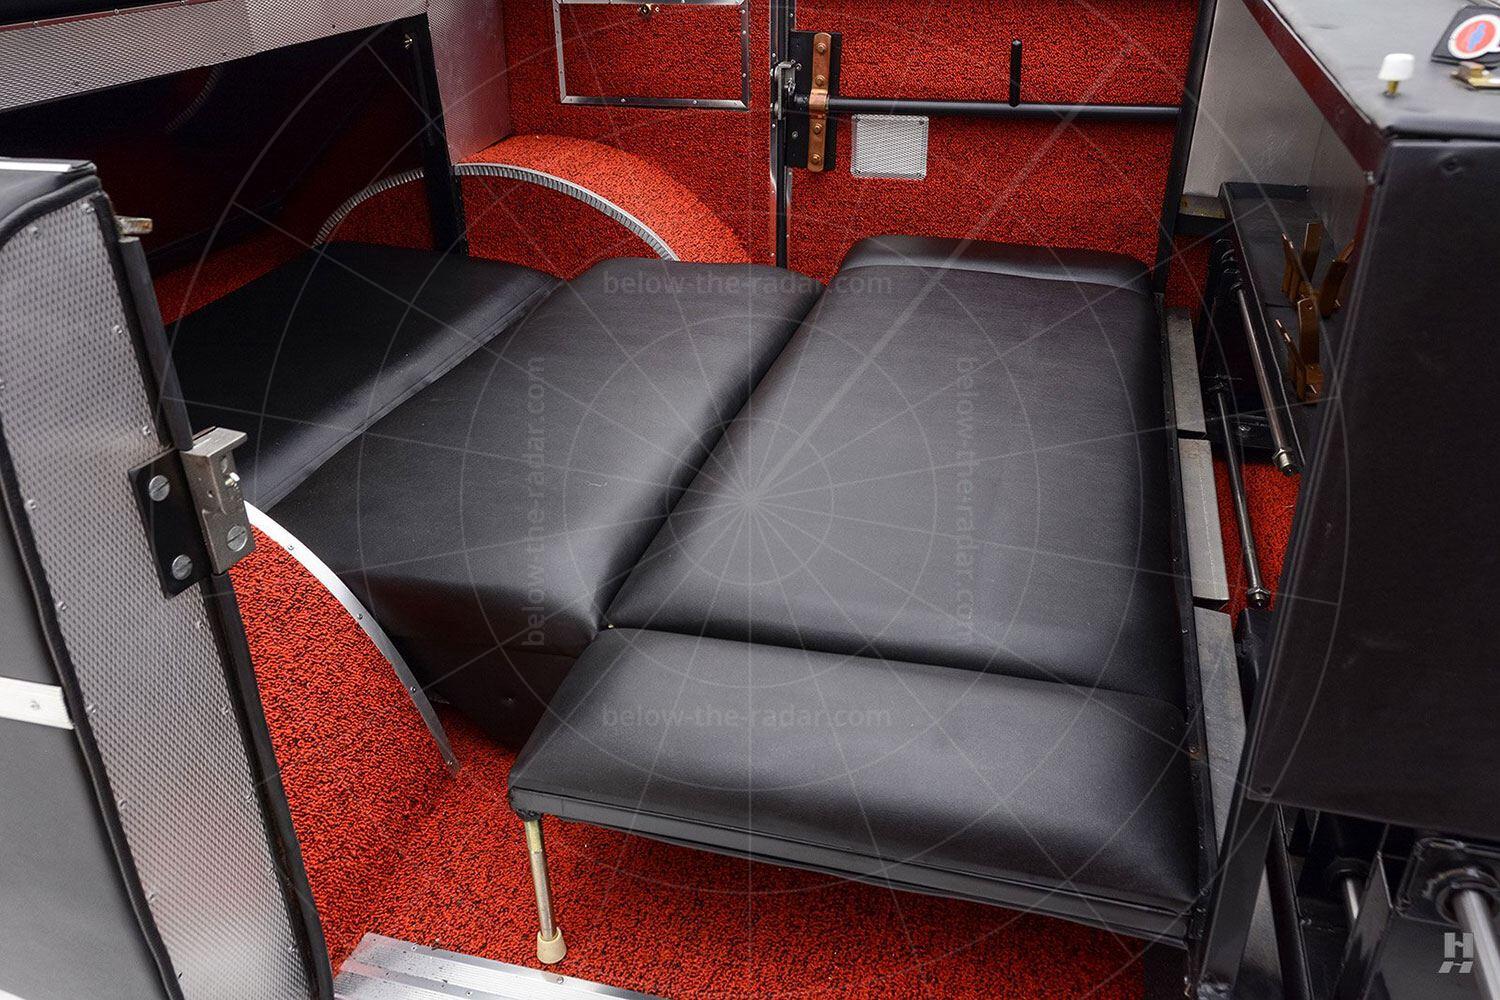 Mohs Safarikar rear seat folded into a bed Pic: Hyman Ltd | Mohs Safarikar rear seat folded into a bed